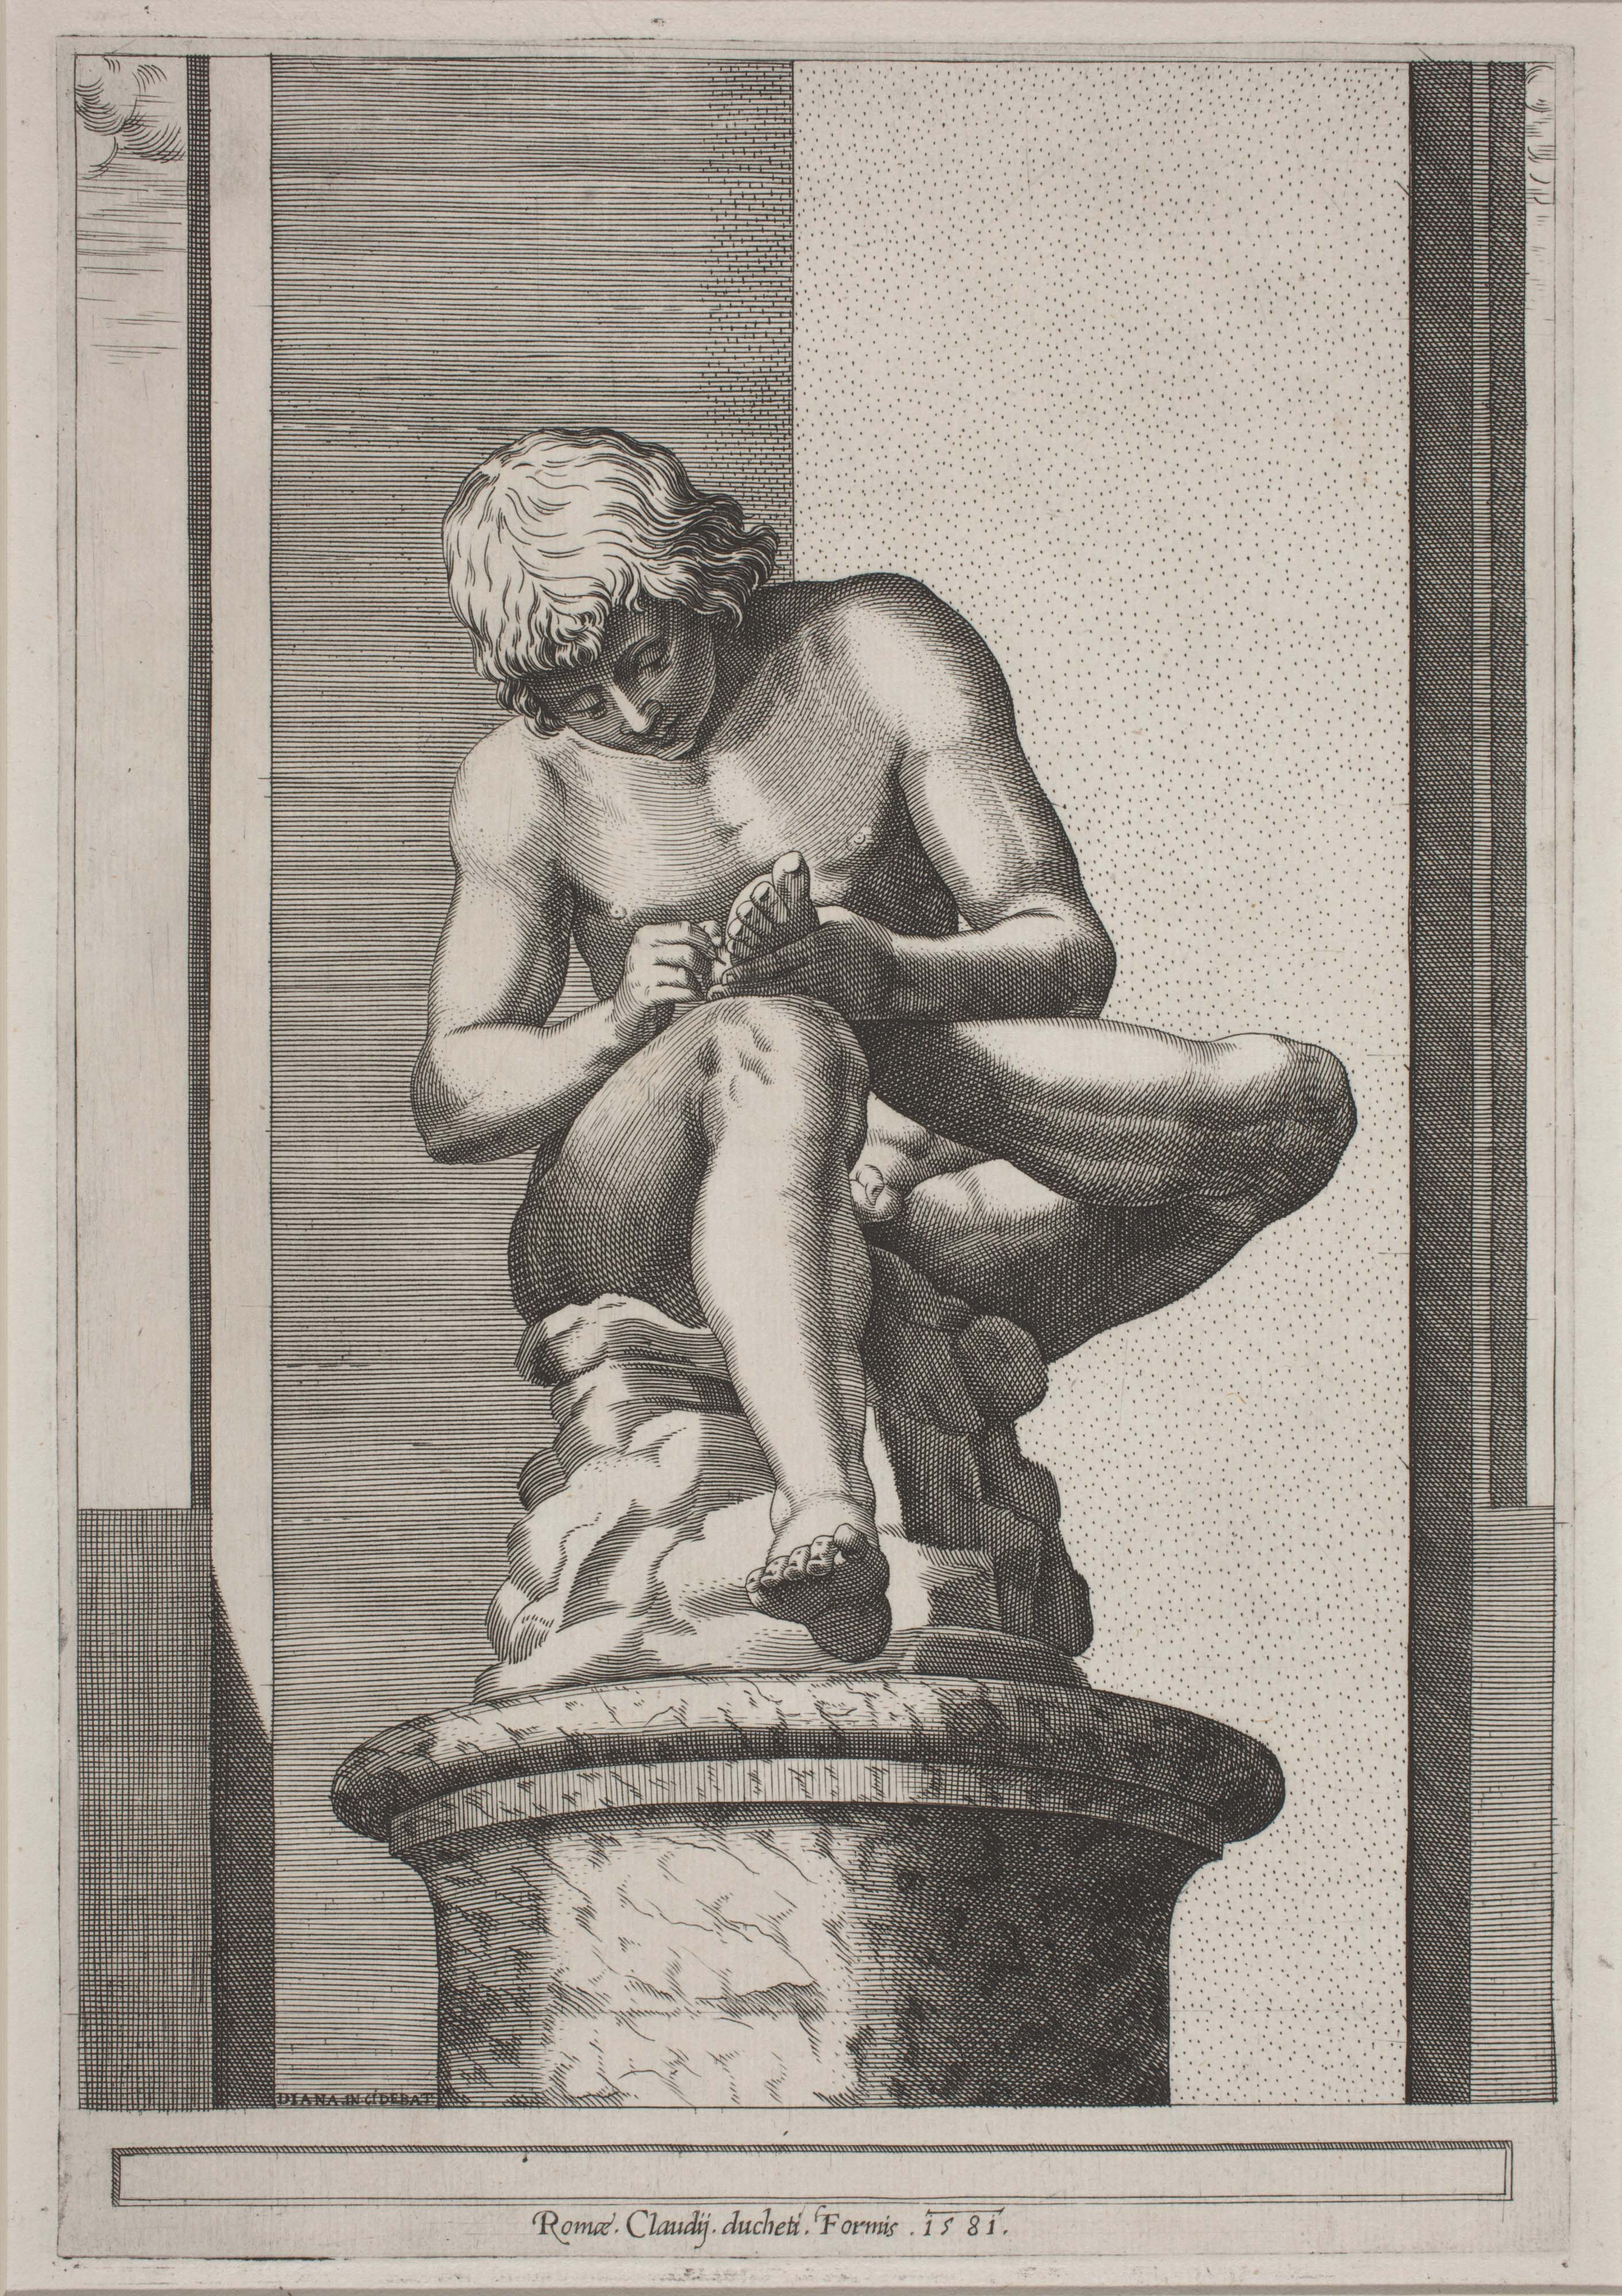 Diana Scultori (Italian, ca. 1535–probably 1588) Claudio Duchetti (French, active in Italy, d. 1585), "The Spinario, State I," 1581, Engraving on laid paper. National Gallery of Art, Washington, D.C., Ailsa Mellon Bruce Fund, 2009.100.1